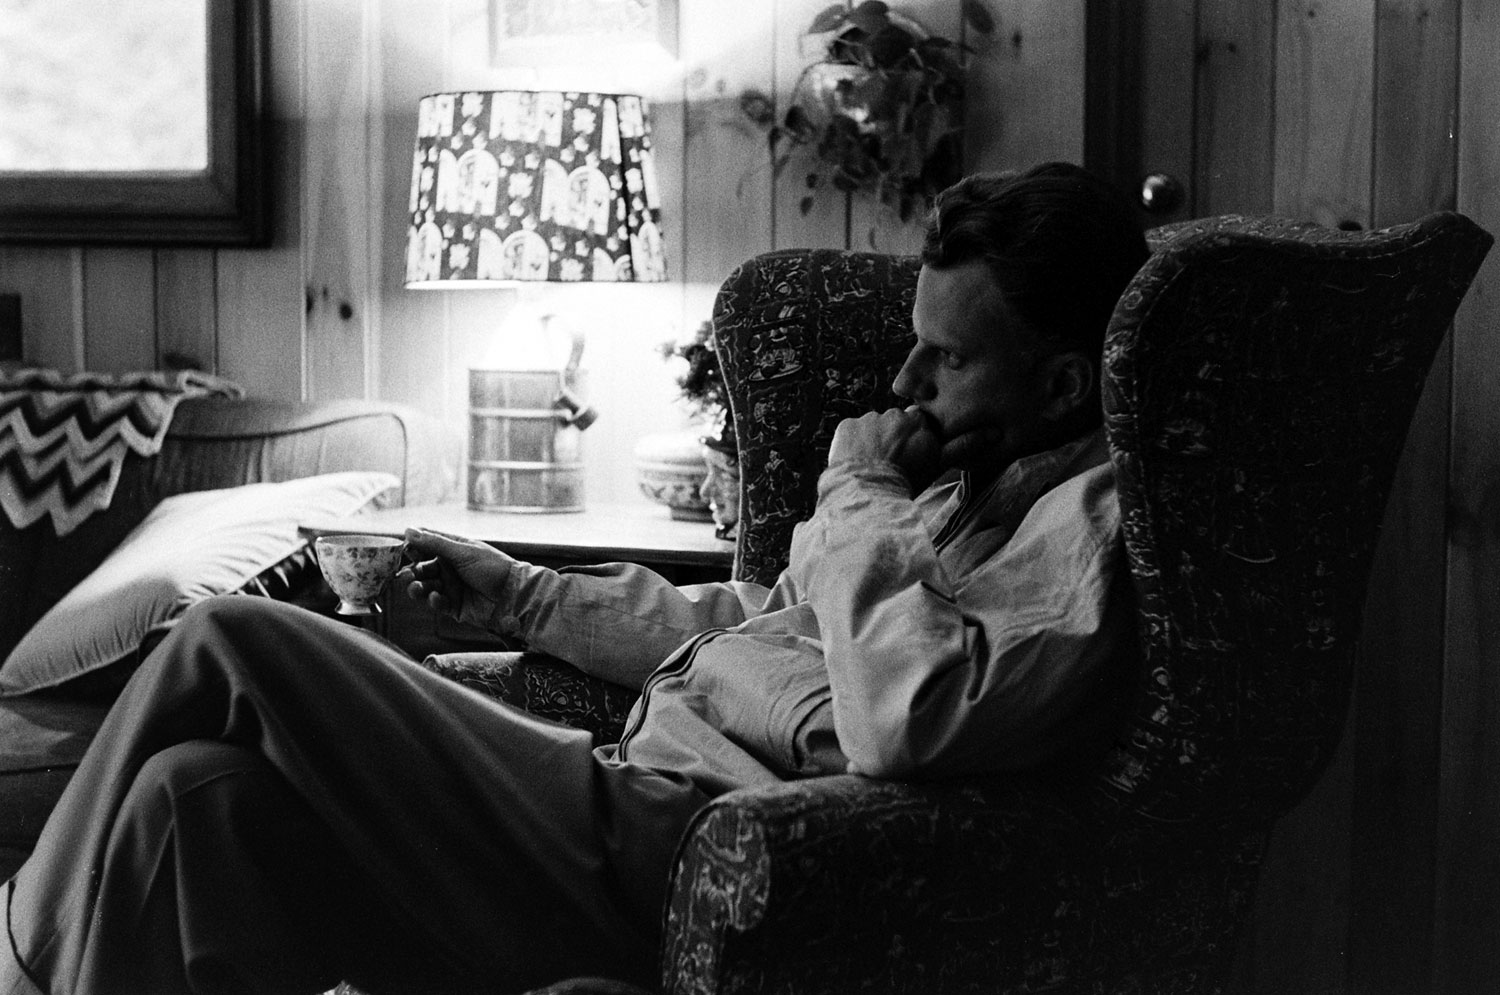 The Rev. Billy Graham relaxes at home, 1955.